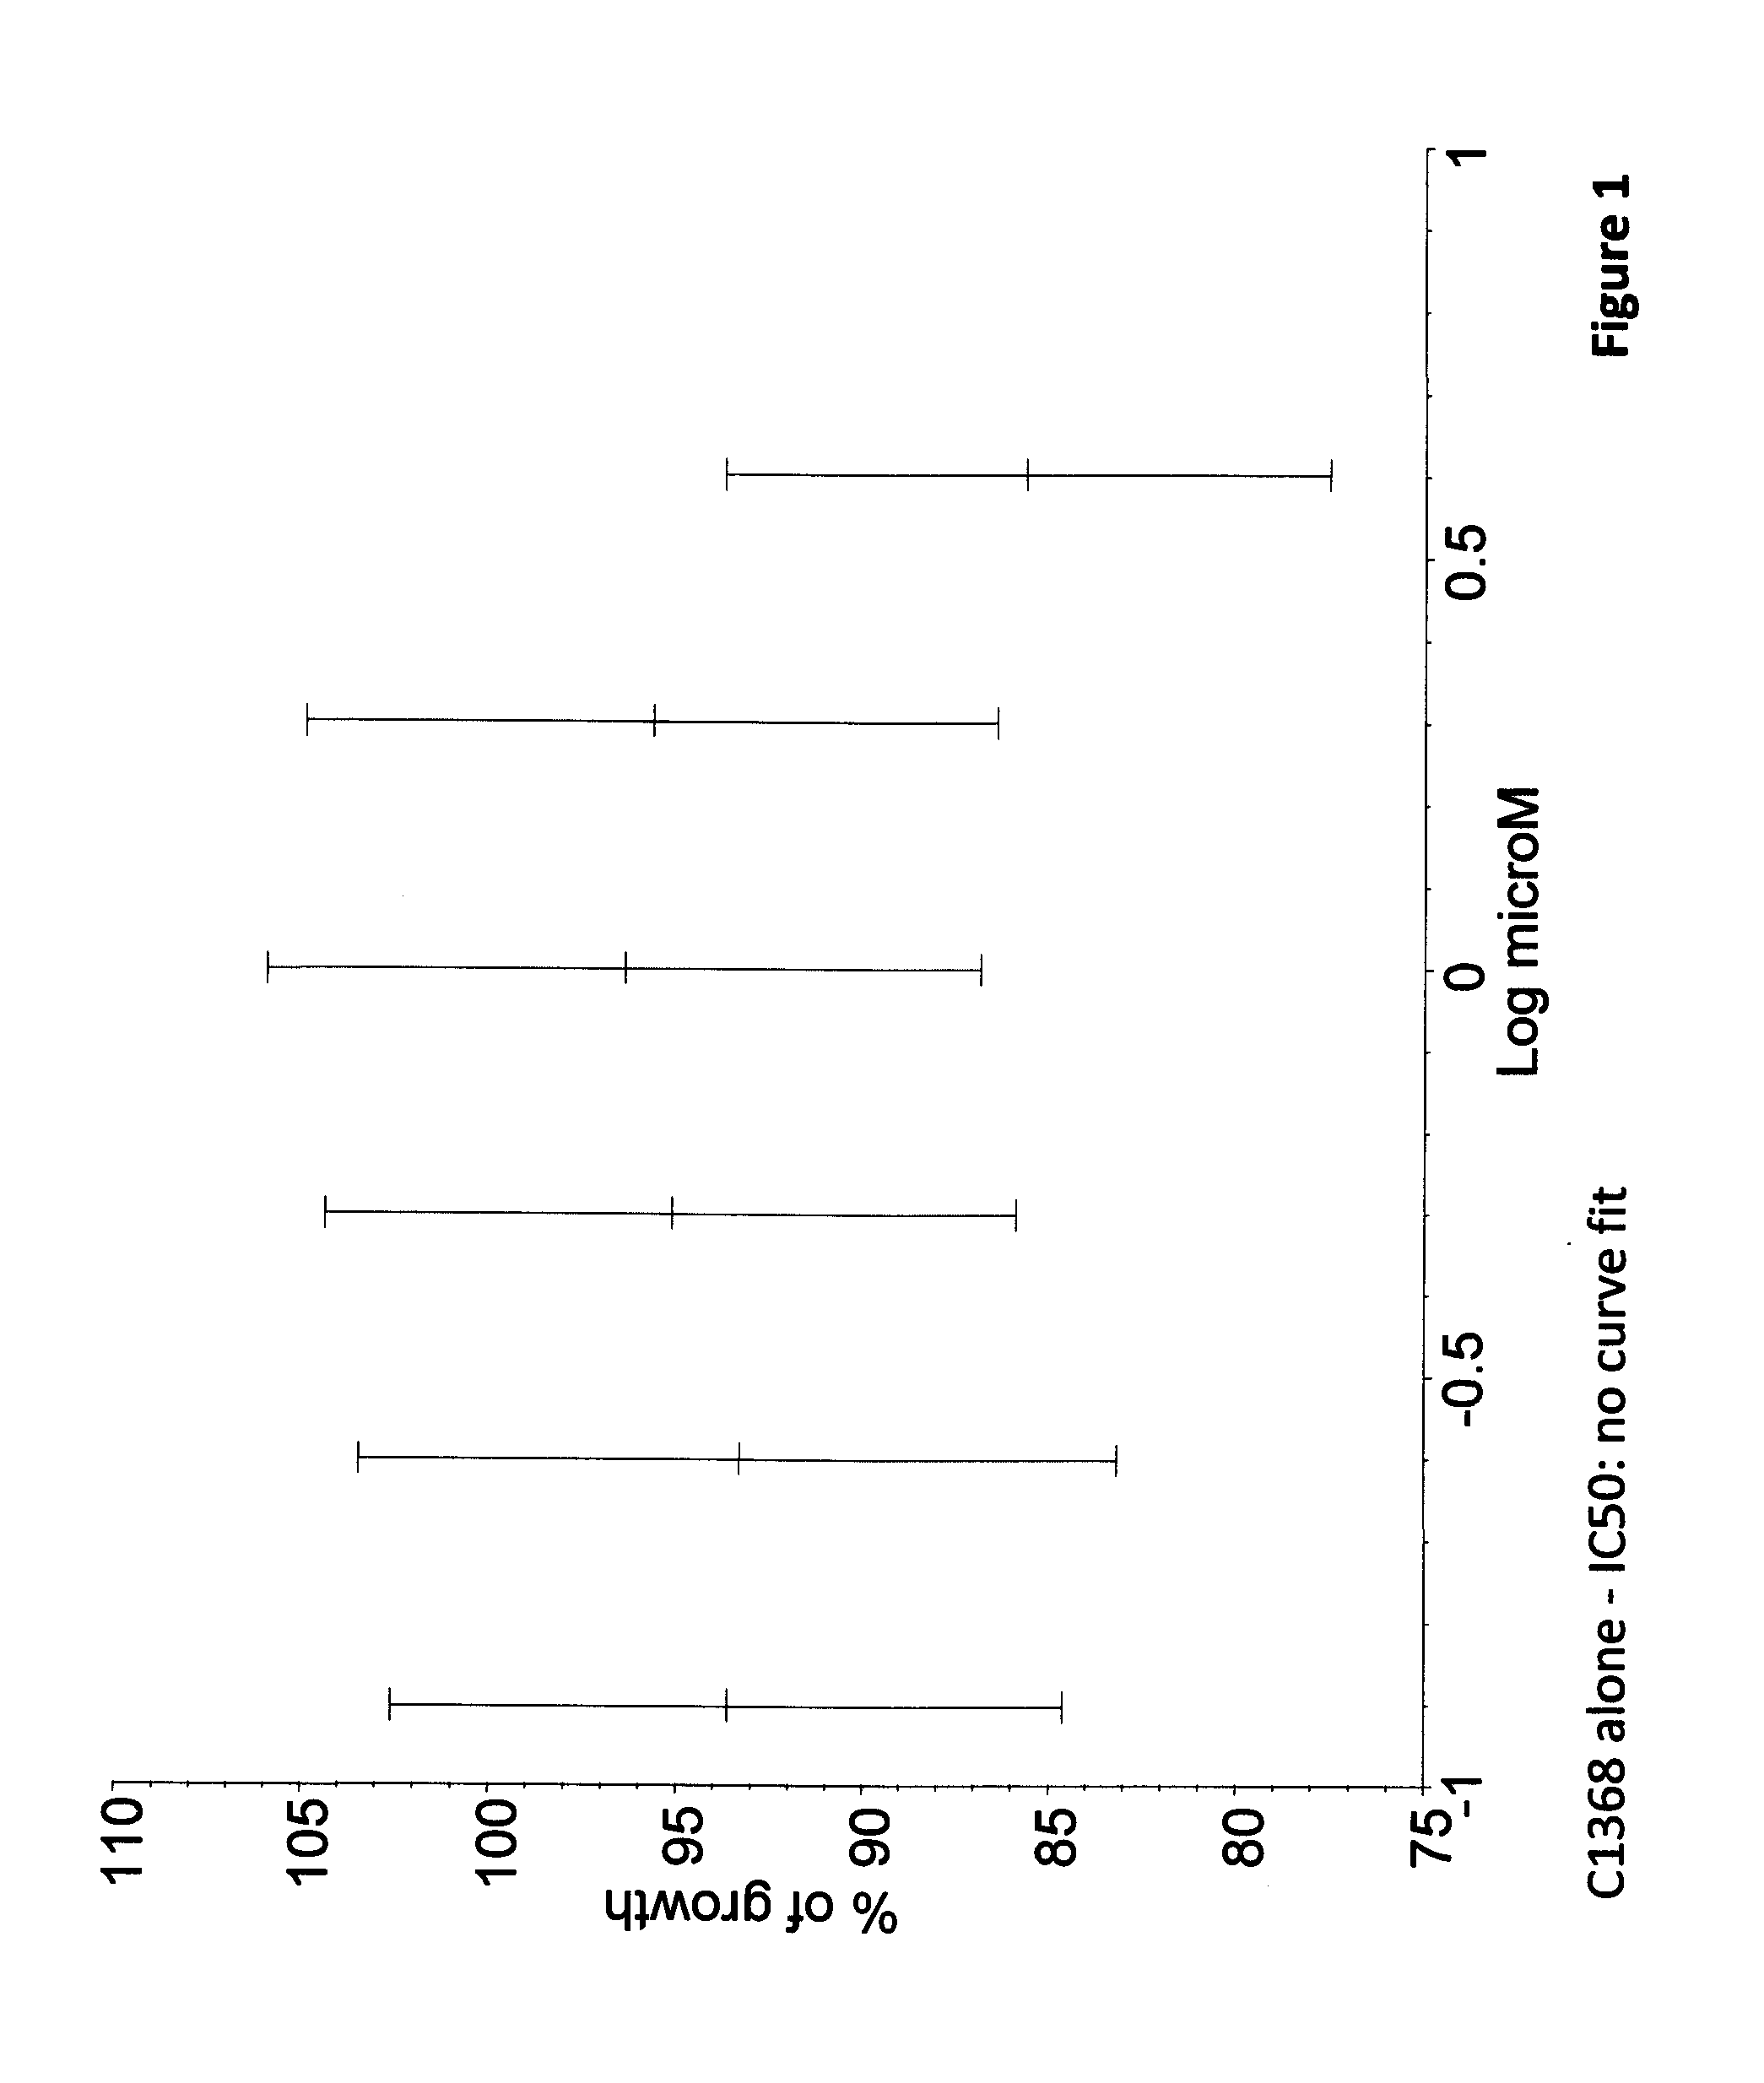 Combination Therapy Based on SRC and Aurora Kinase Inhibition for the Treatment of Cancer